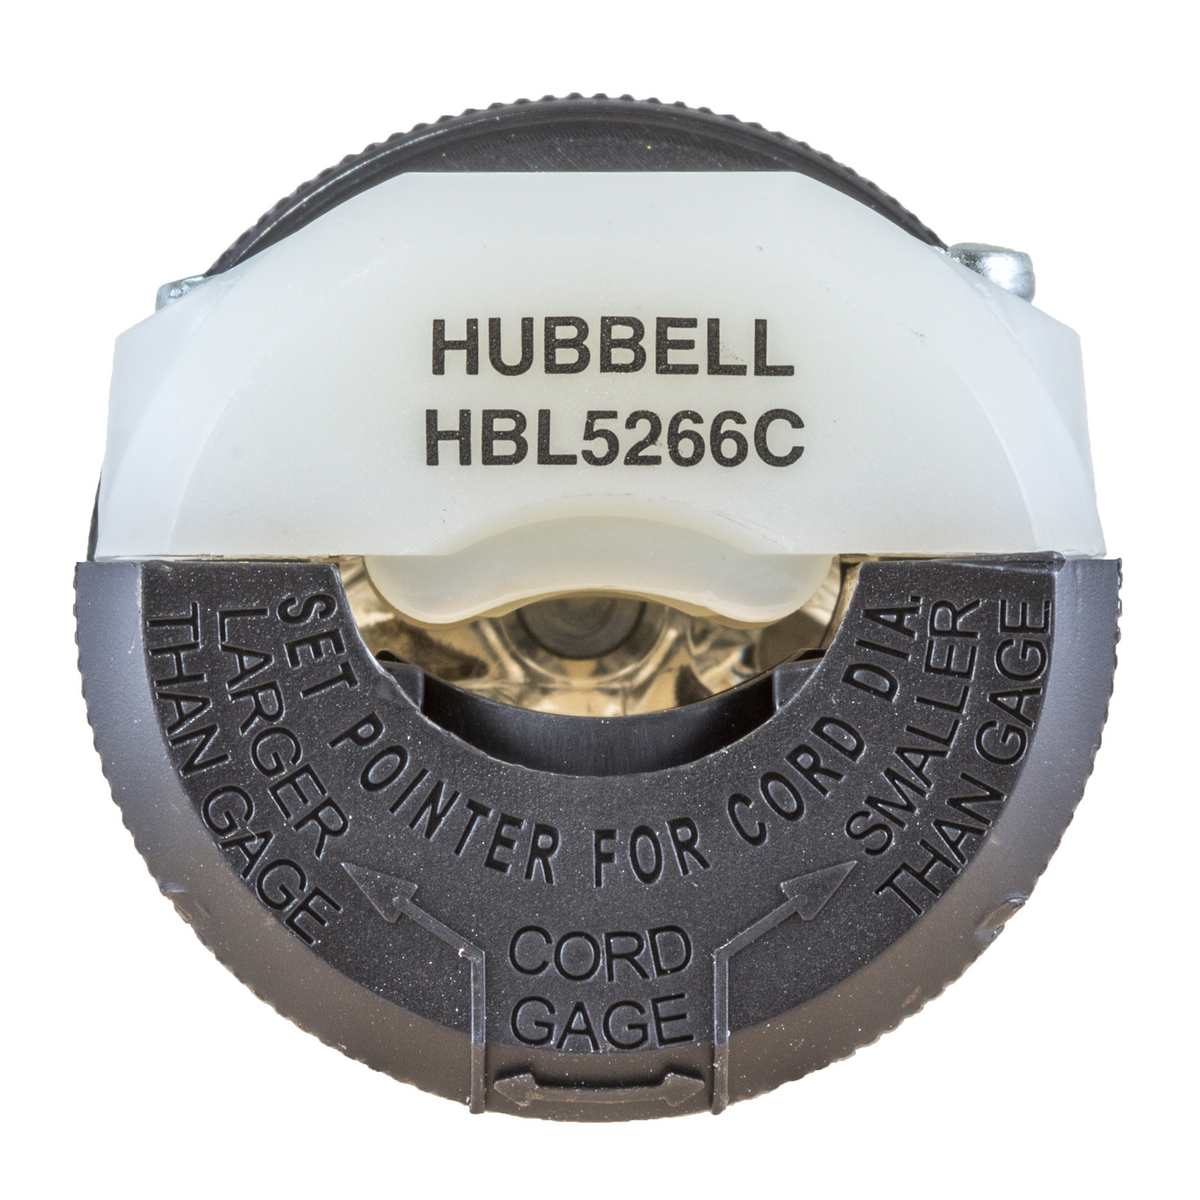 HUBBELL HBL5266C Male Plug 15A 2 Pole 3 Wire 125V  Pack of 2 